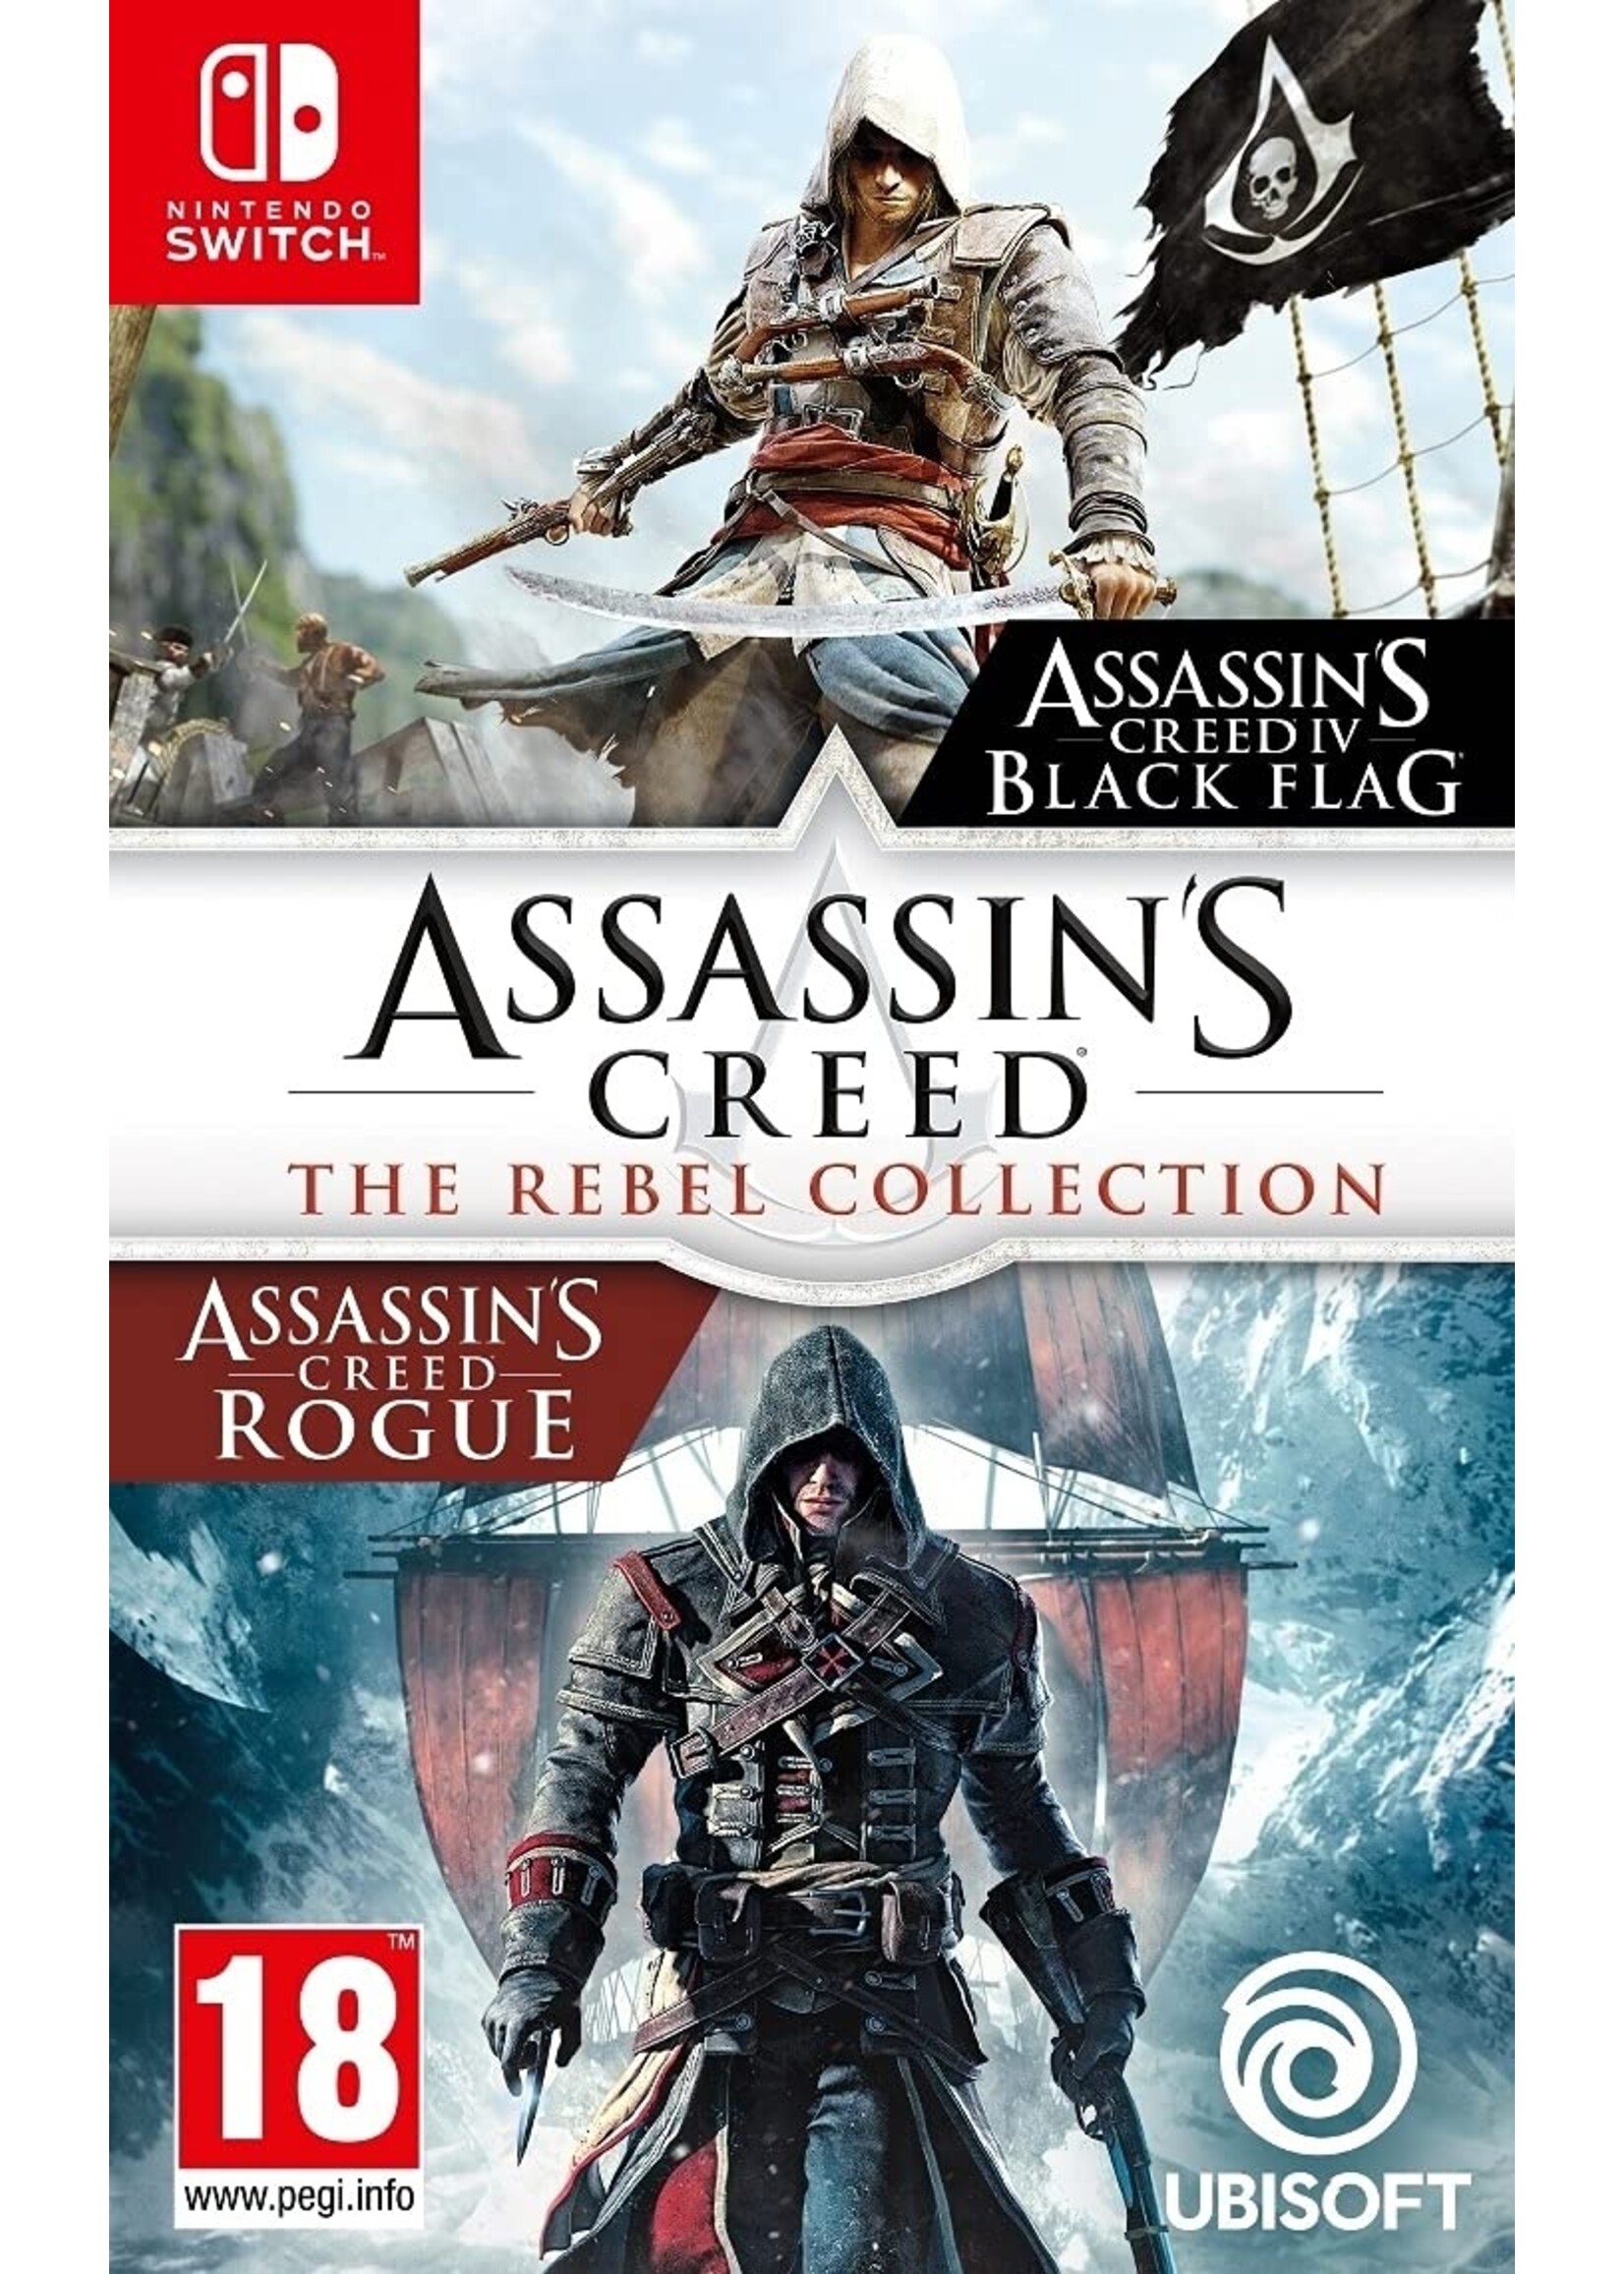 Assassin's Creed The Rebel Collection - SWITCH NEW